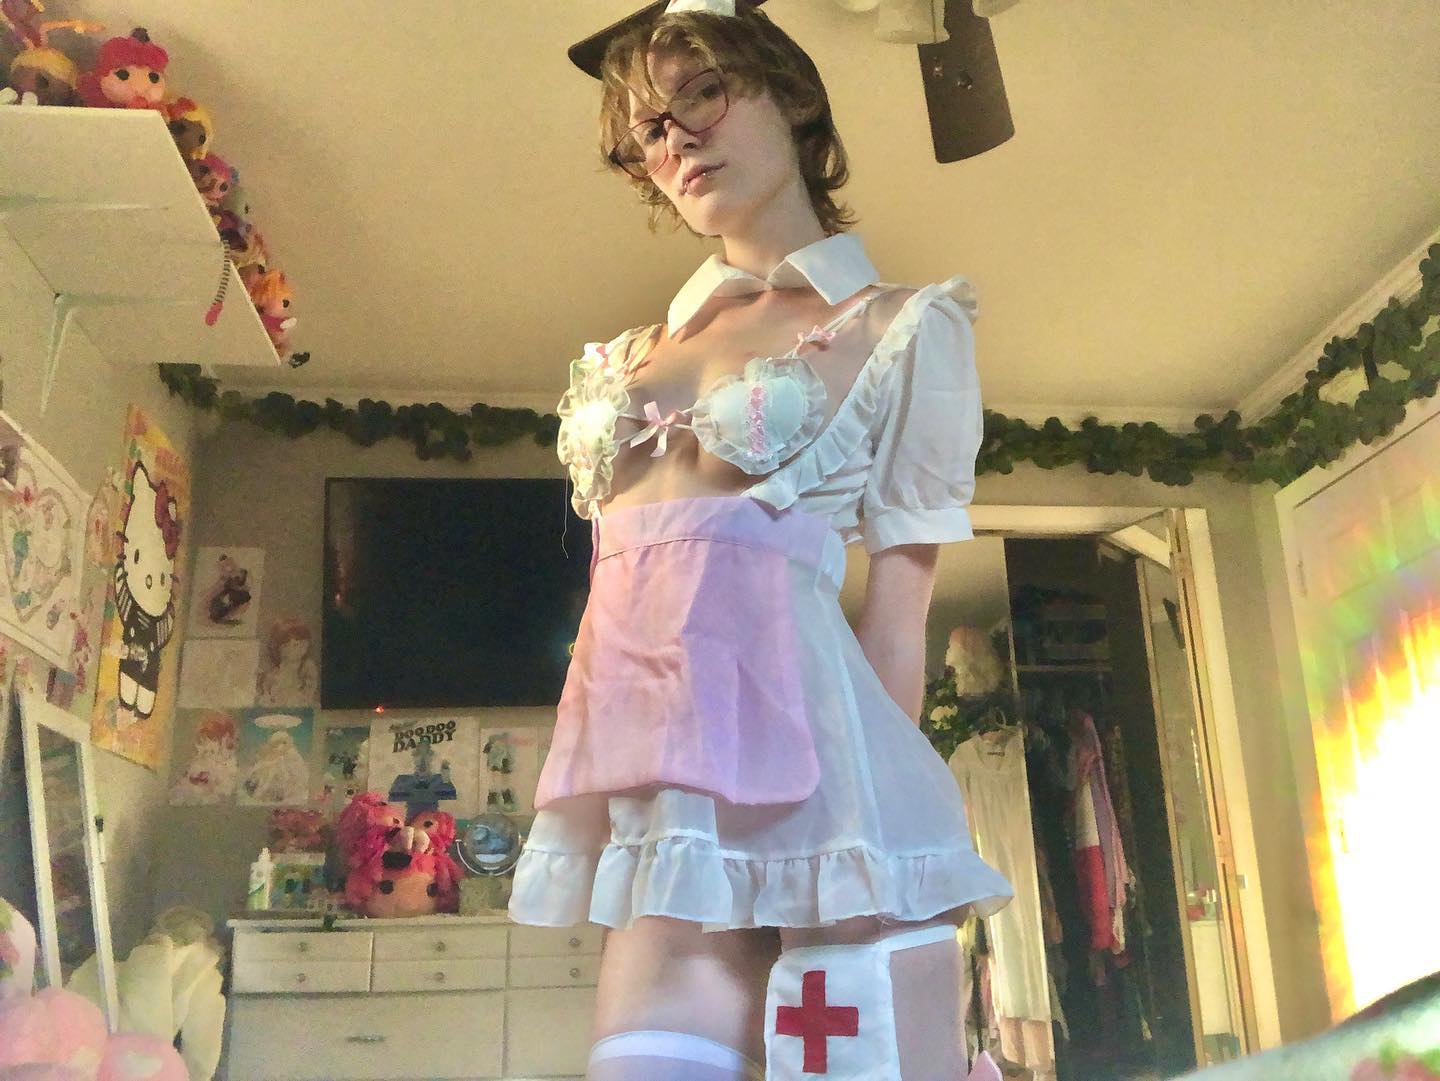 Nurse Bunny here to make the booboos not so owie 🩹